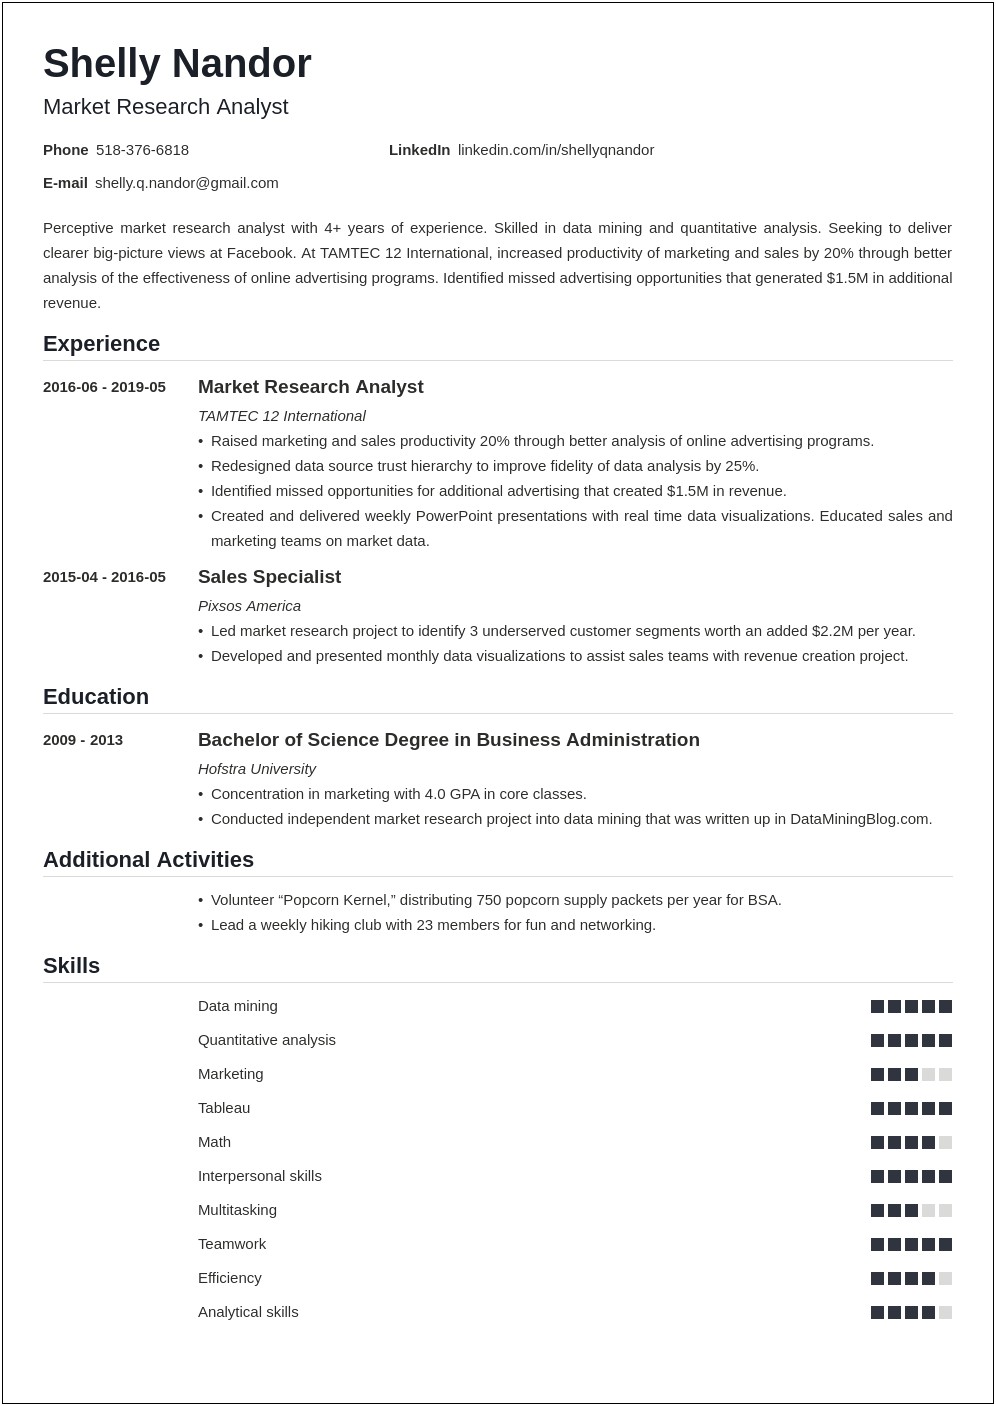 Best Resume For Market Research